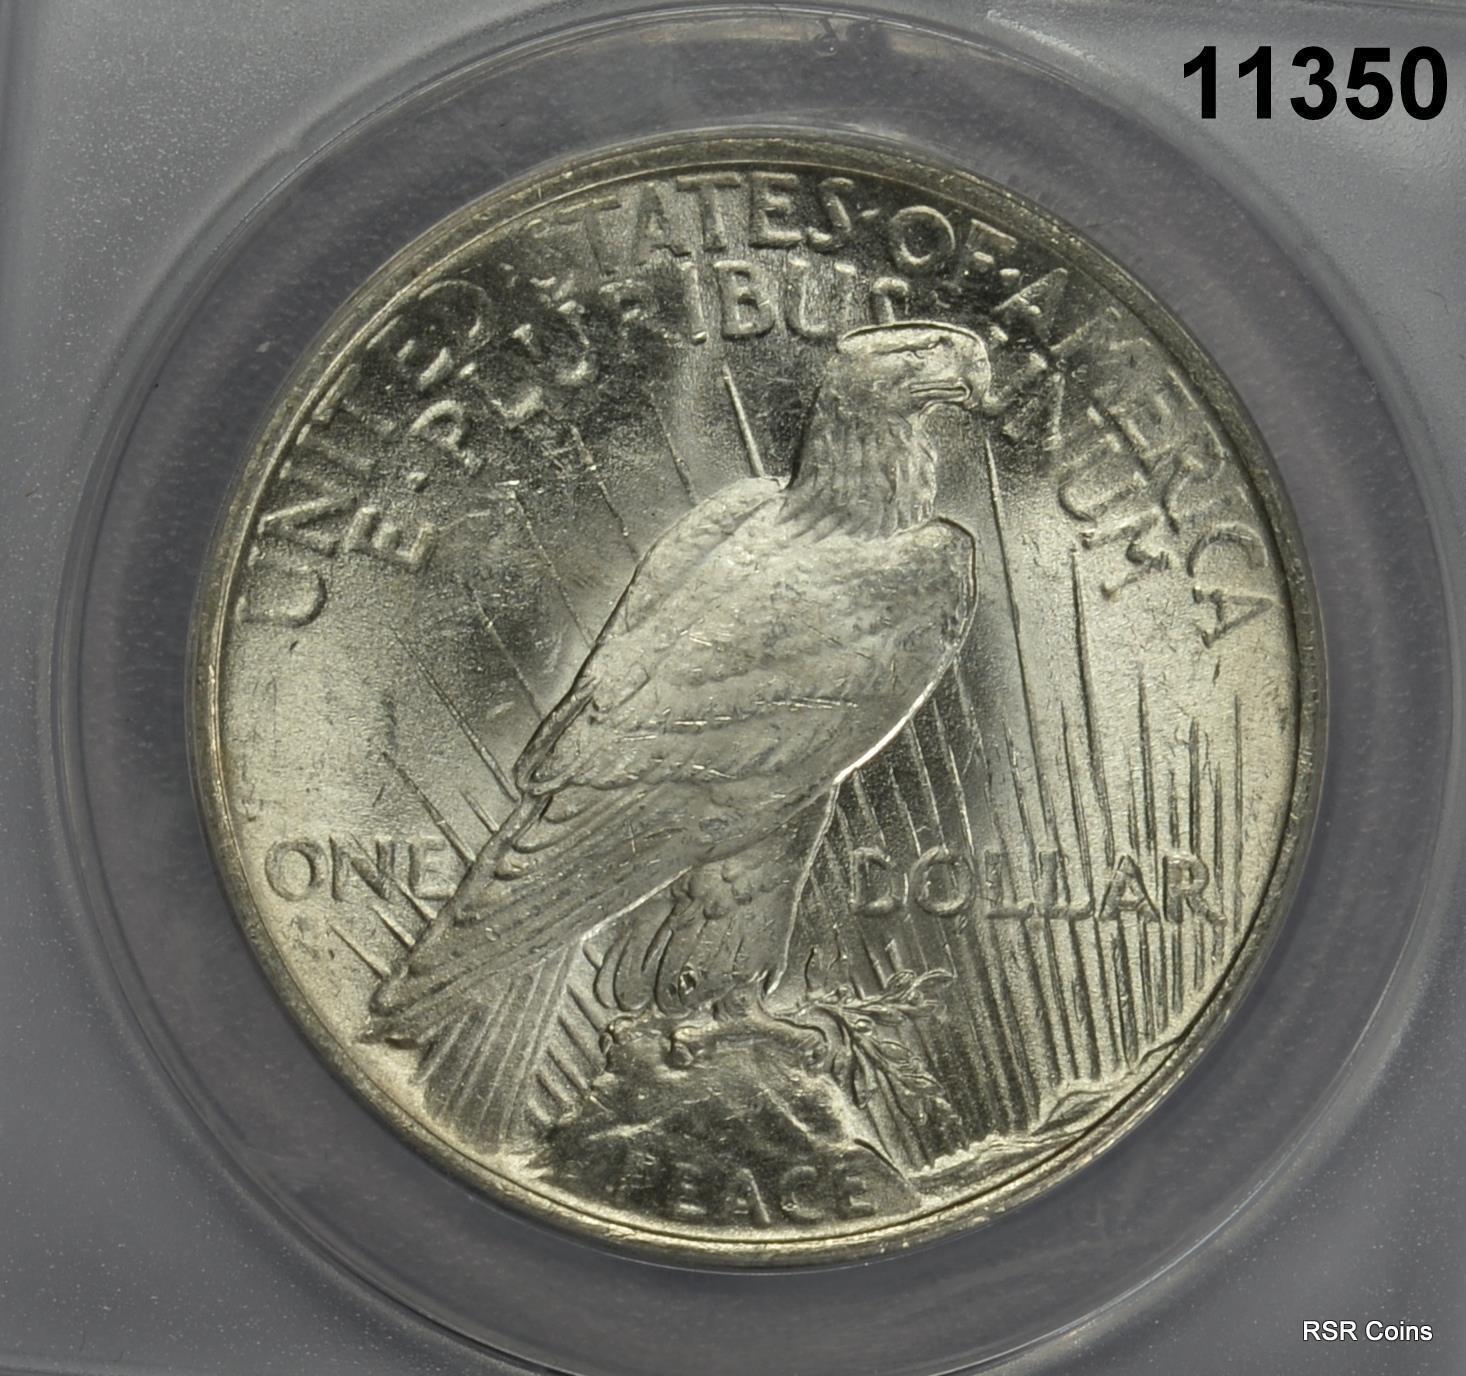 1923 PEACE SILVER DOLLAR ANACS CERTIFIED MS63 FLASHY! #11350